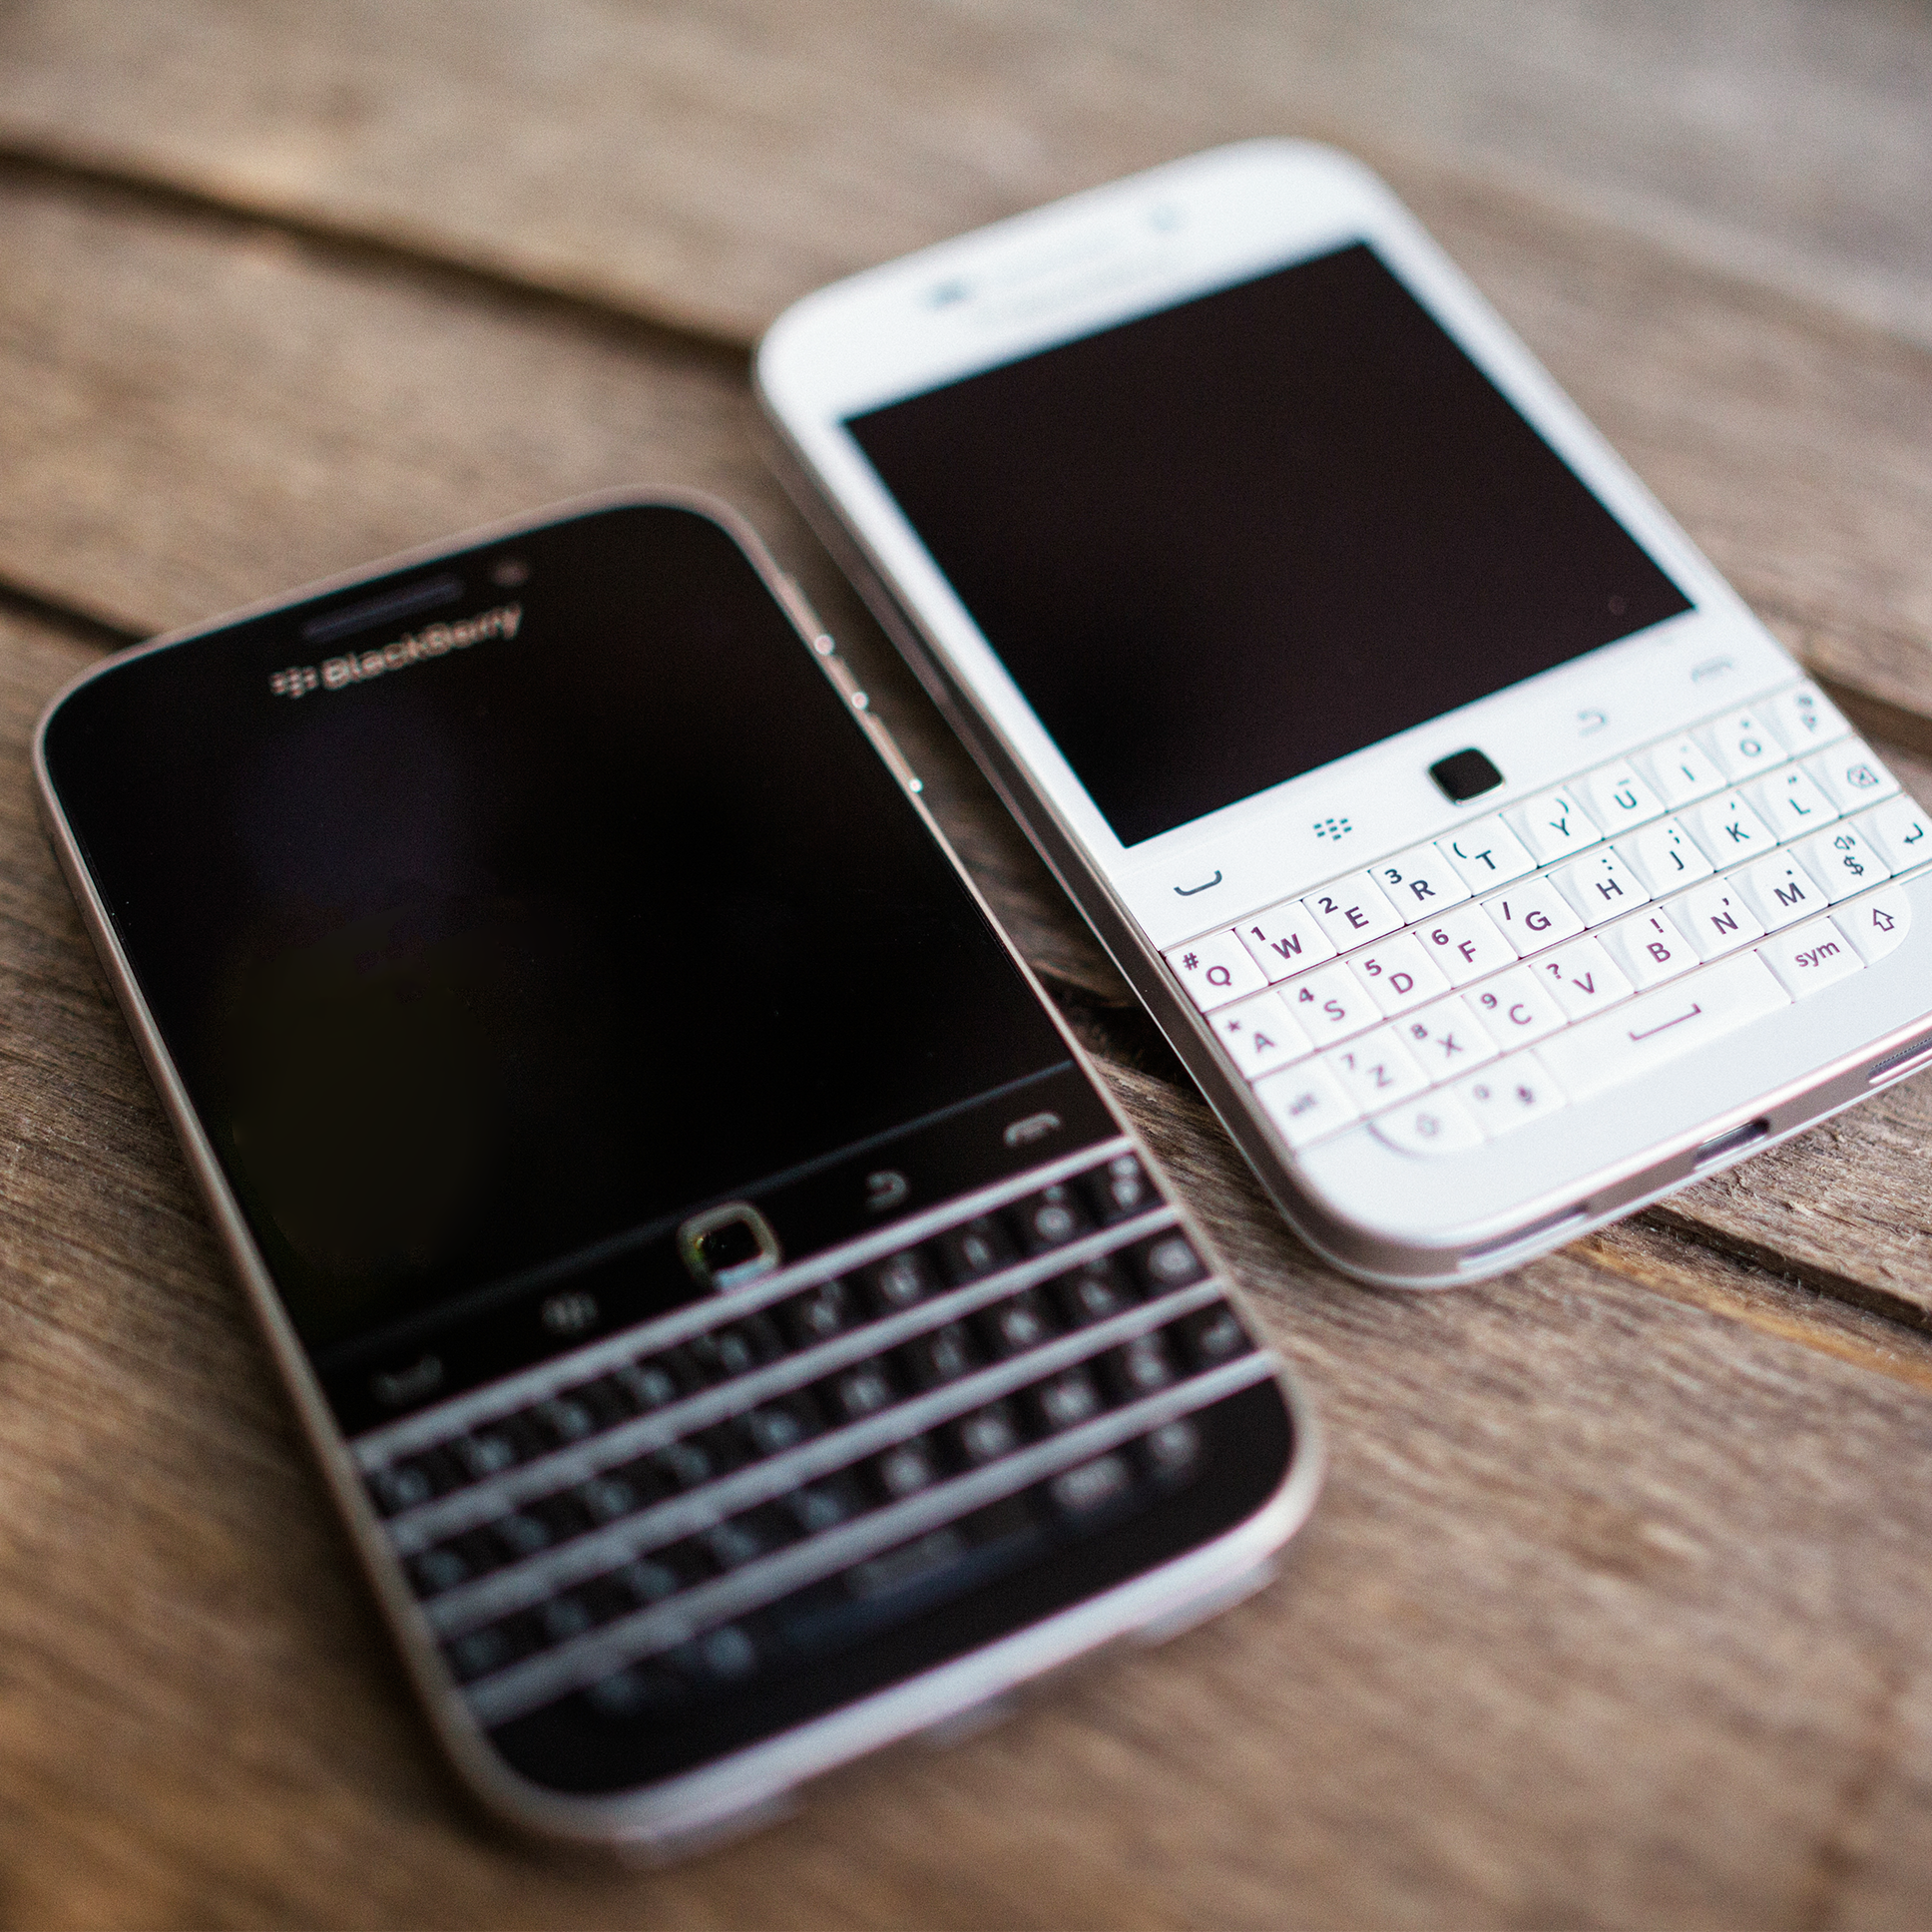 Change is Only Natural: A Classic Model Makes Way | Inside BlackBerry